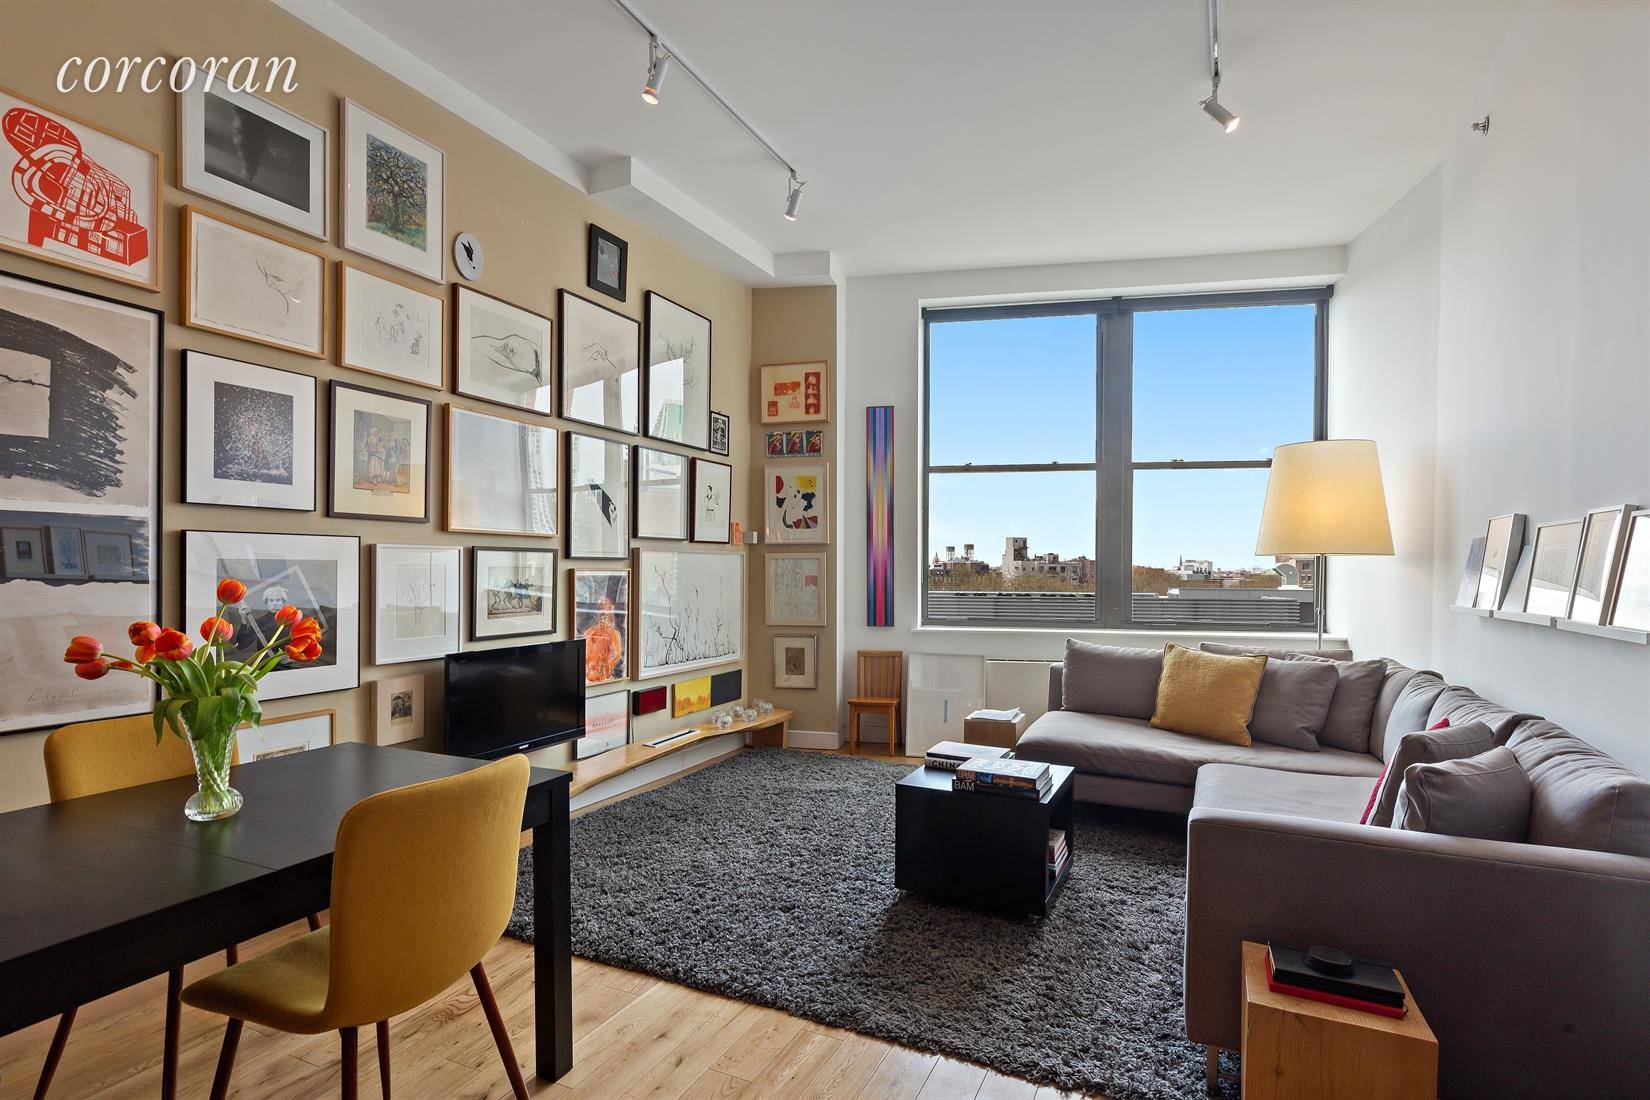 Measuring over 720 square feet, with 11' ceilings throughout and a separate sleeping area complete with custom floor to ceiling sliding doors, this apartment feels like a spacious one bedroom, ...